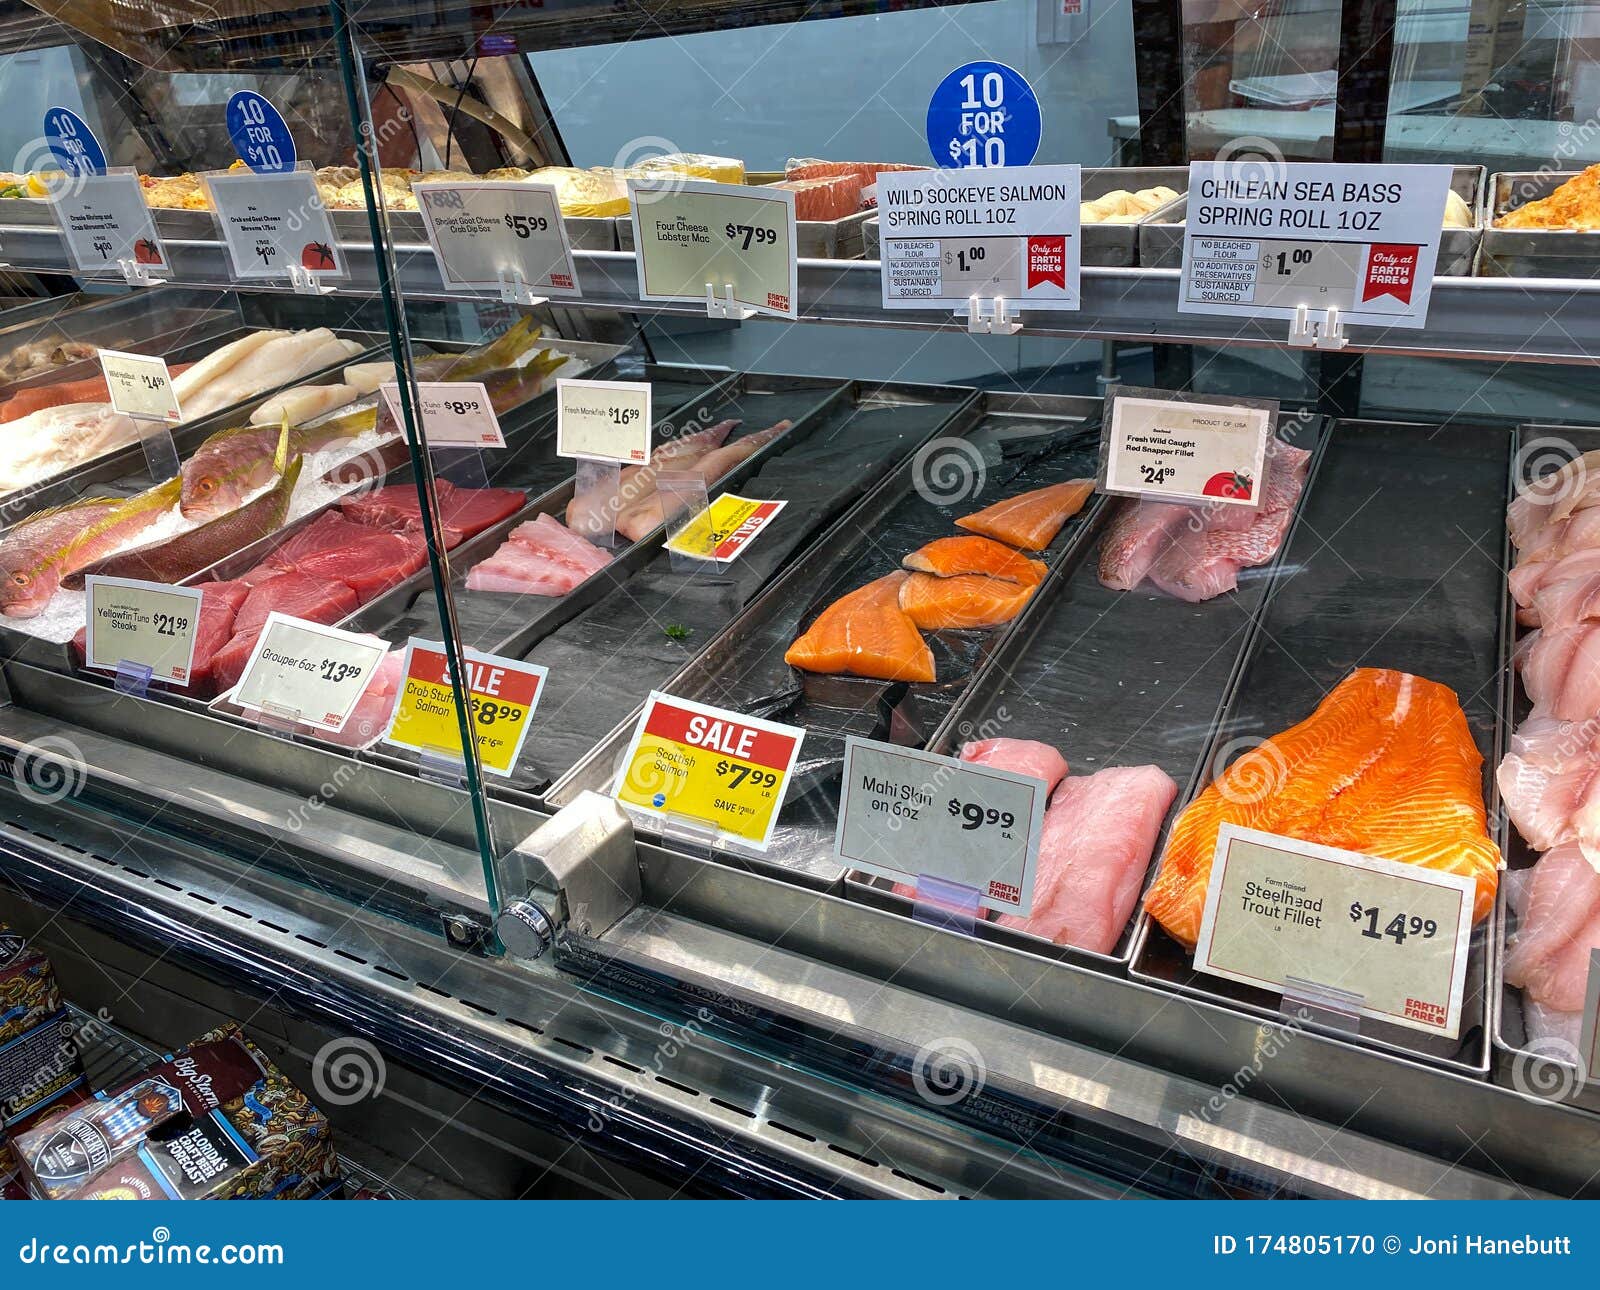 A Display of a Variety of Fish in a Refrigerated Case at a Grocery